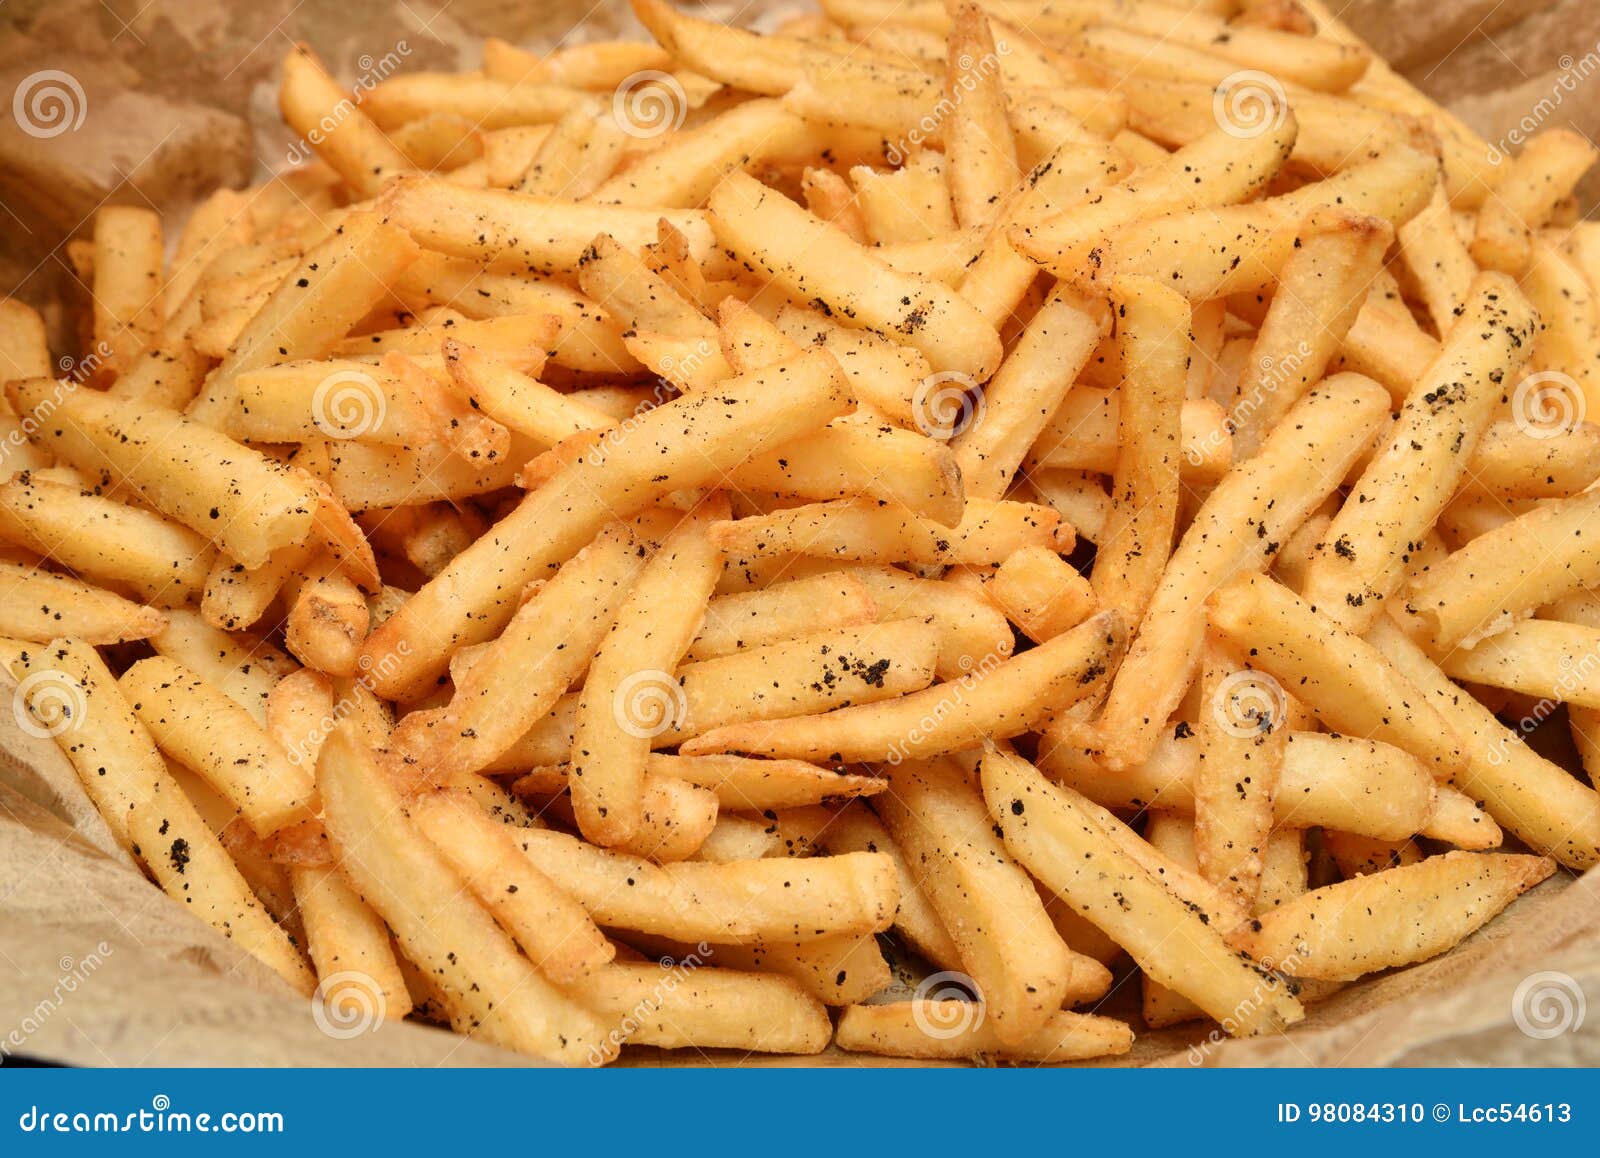 French fries stock photo. Image of salty, snack, closeup - 98084310